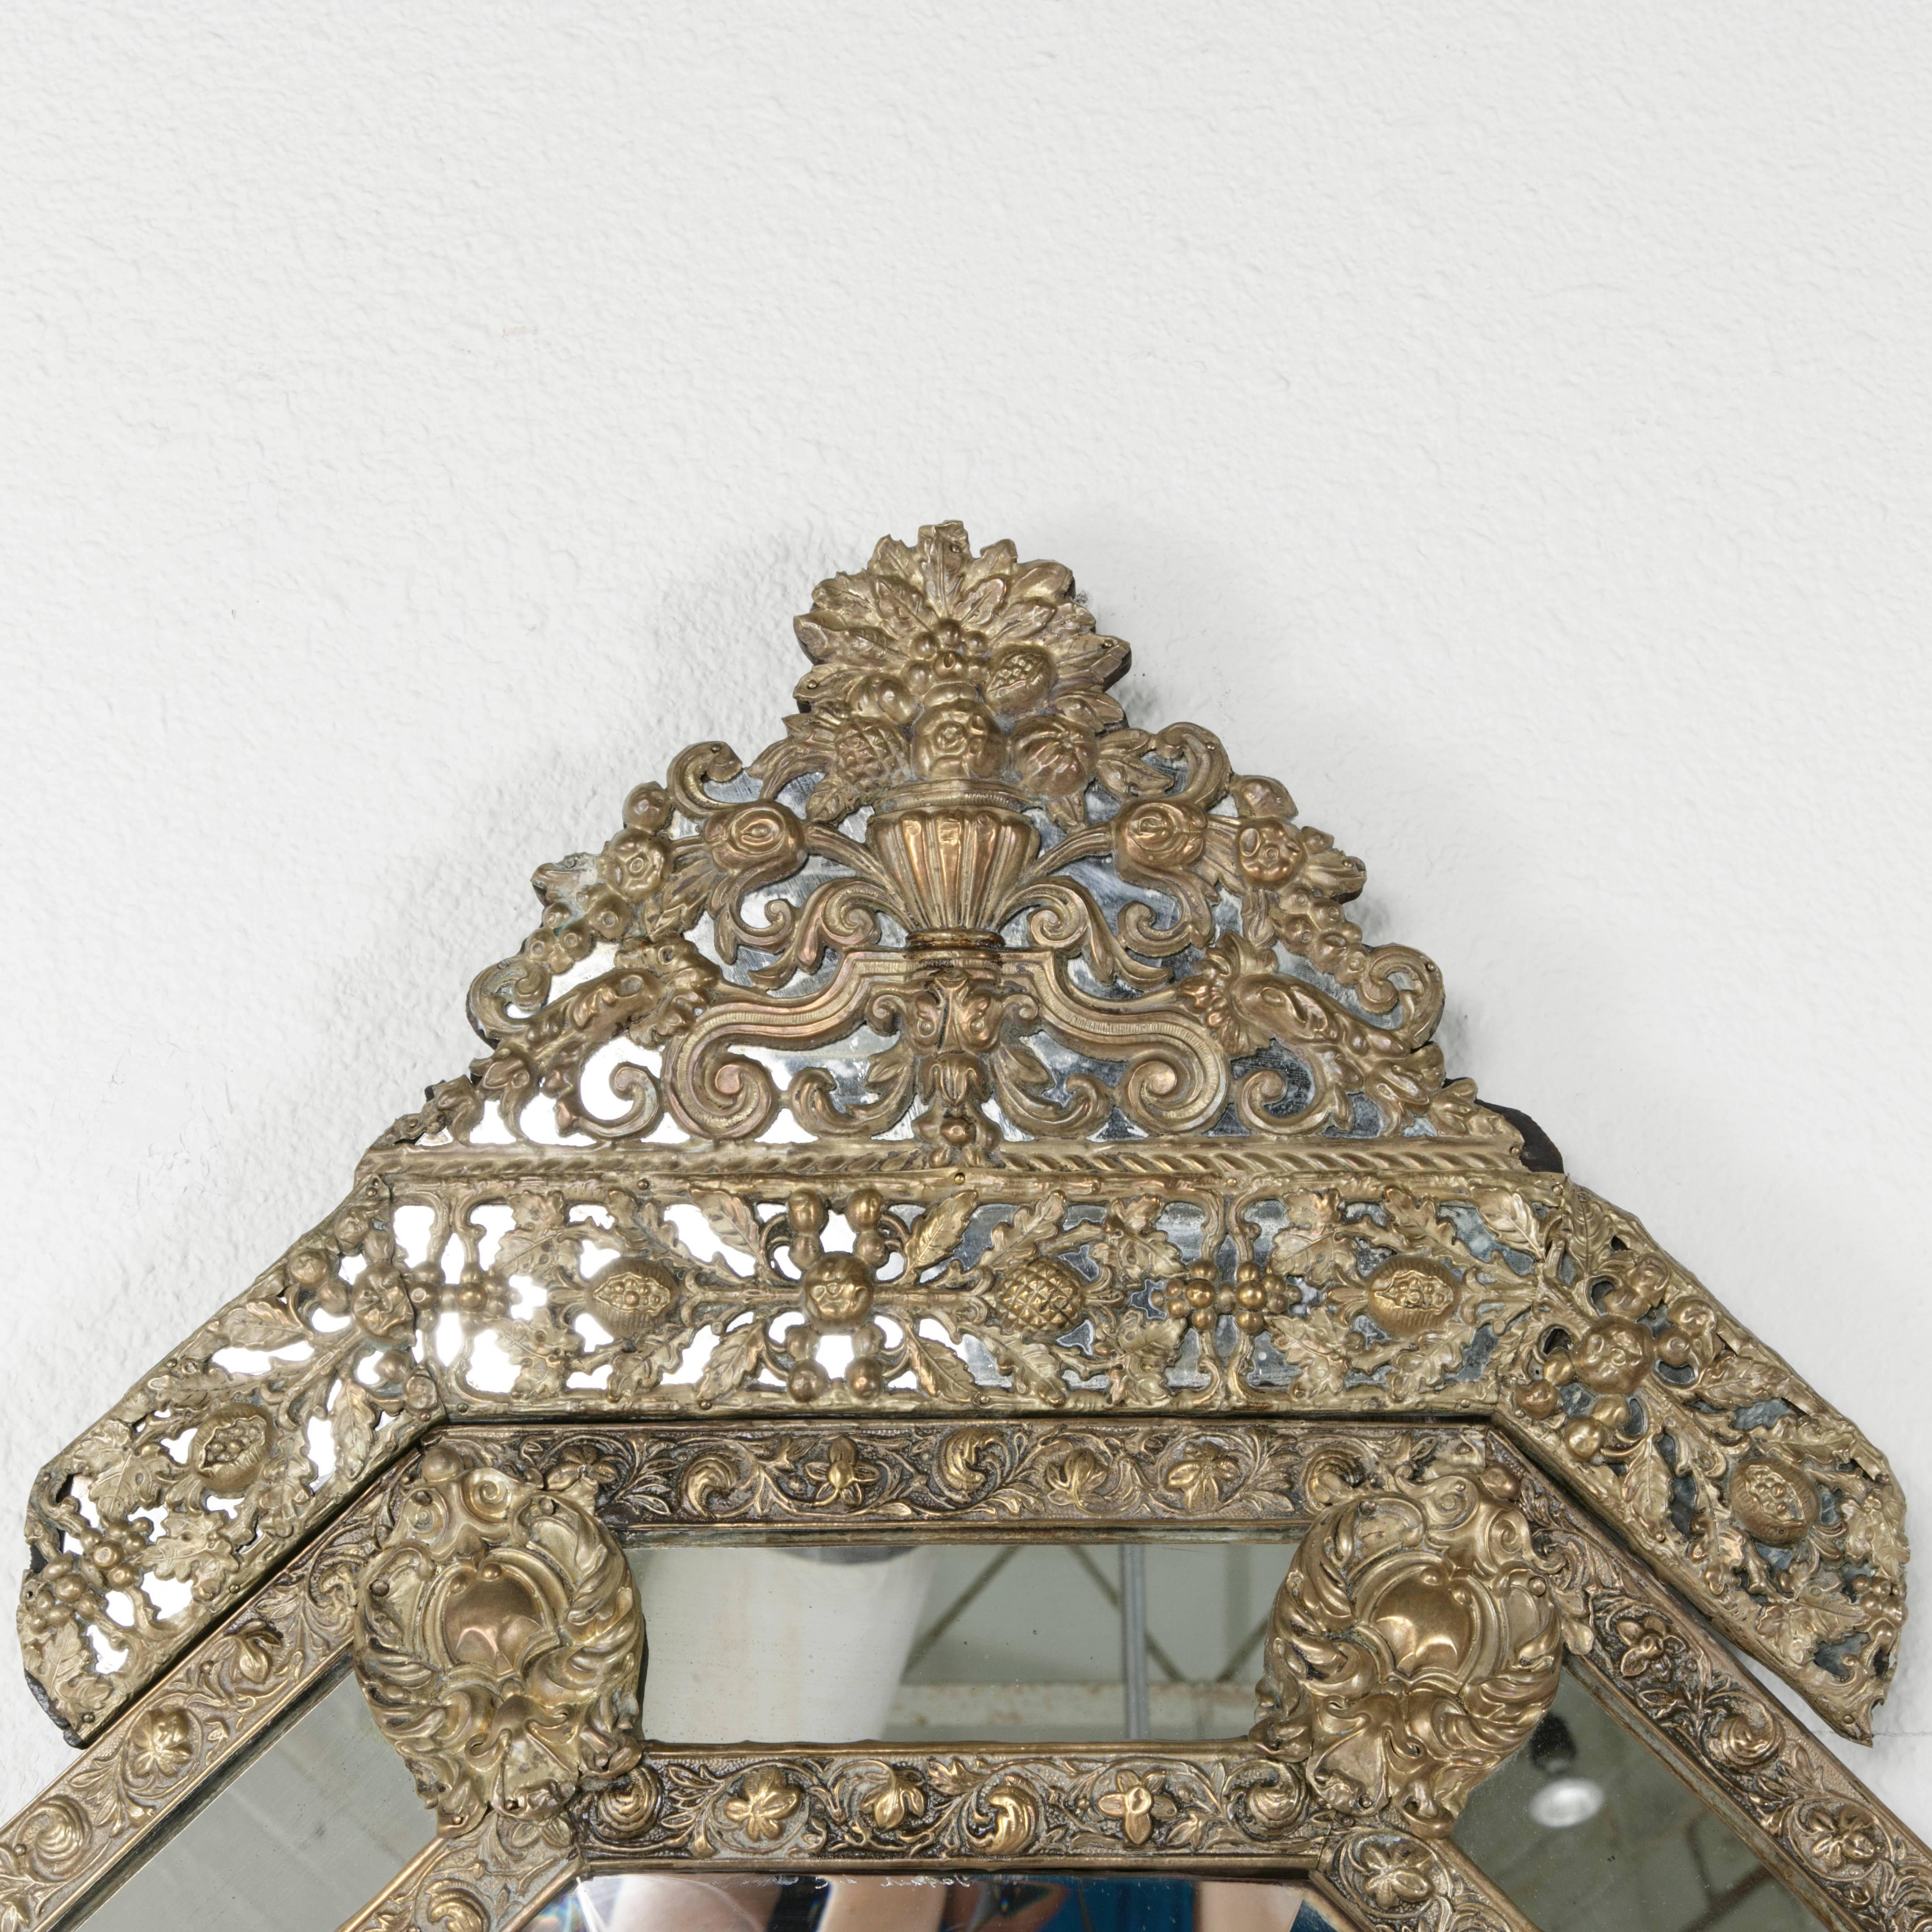 This richly detailed Napoleon III bronze repoussé cushion mirror has a beautifully patinated finish on its floral motif double frame. The original aged mirror insets on this piece lend additional warmth, while the central beveled piece of mirror